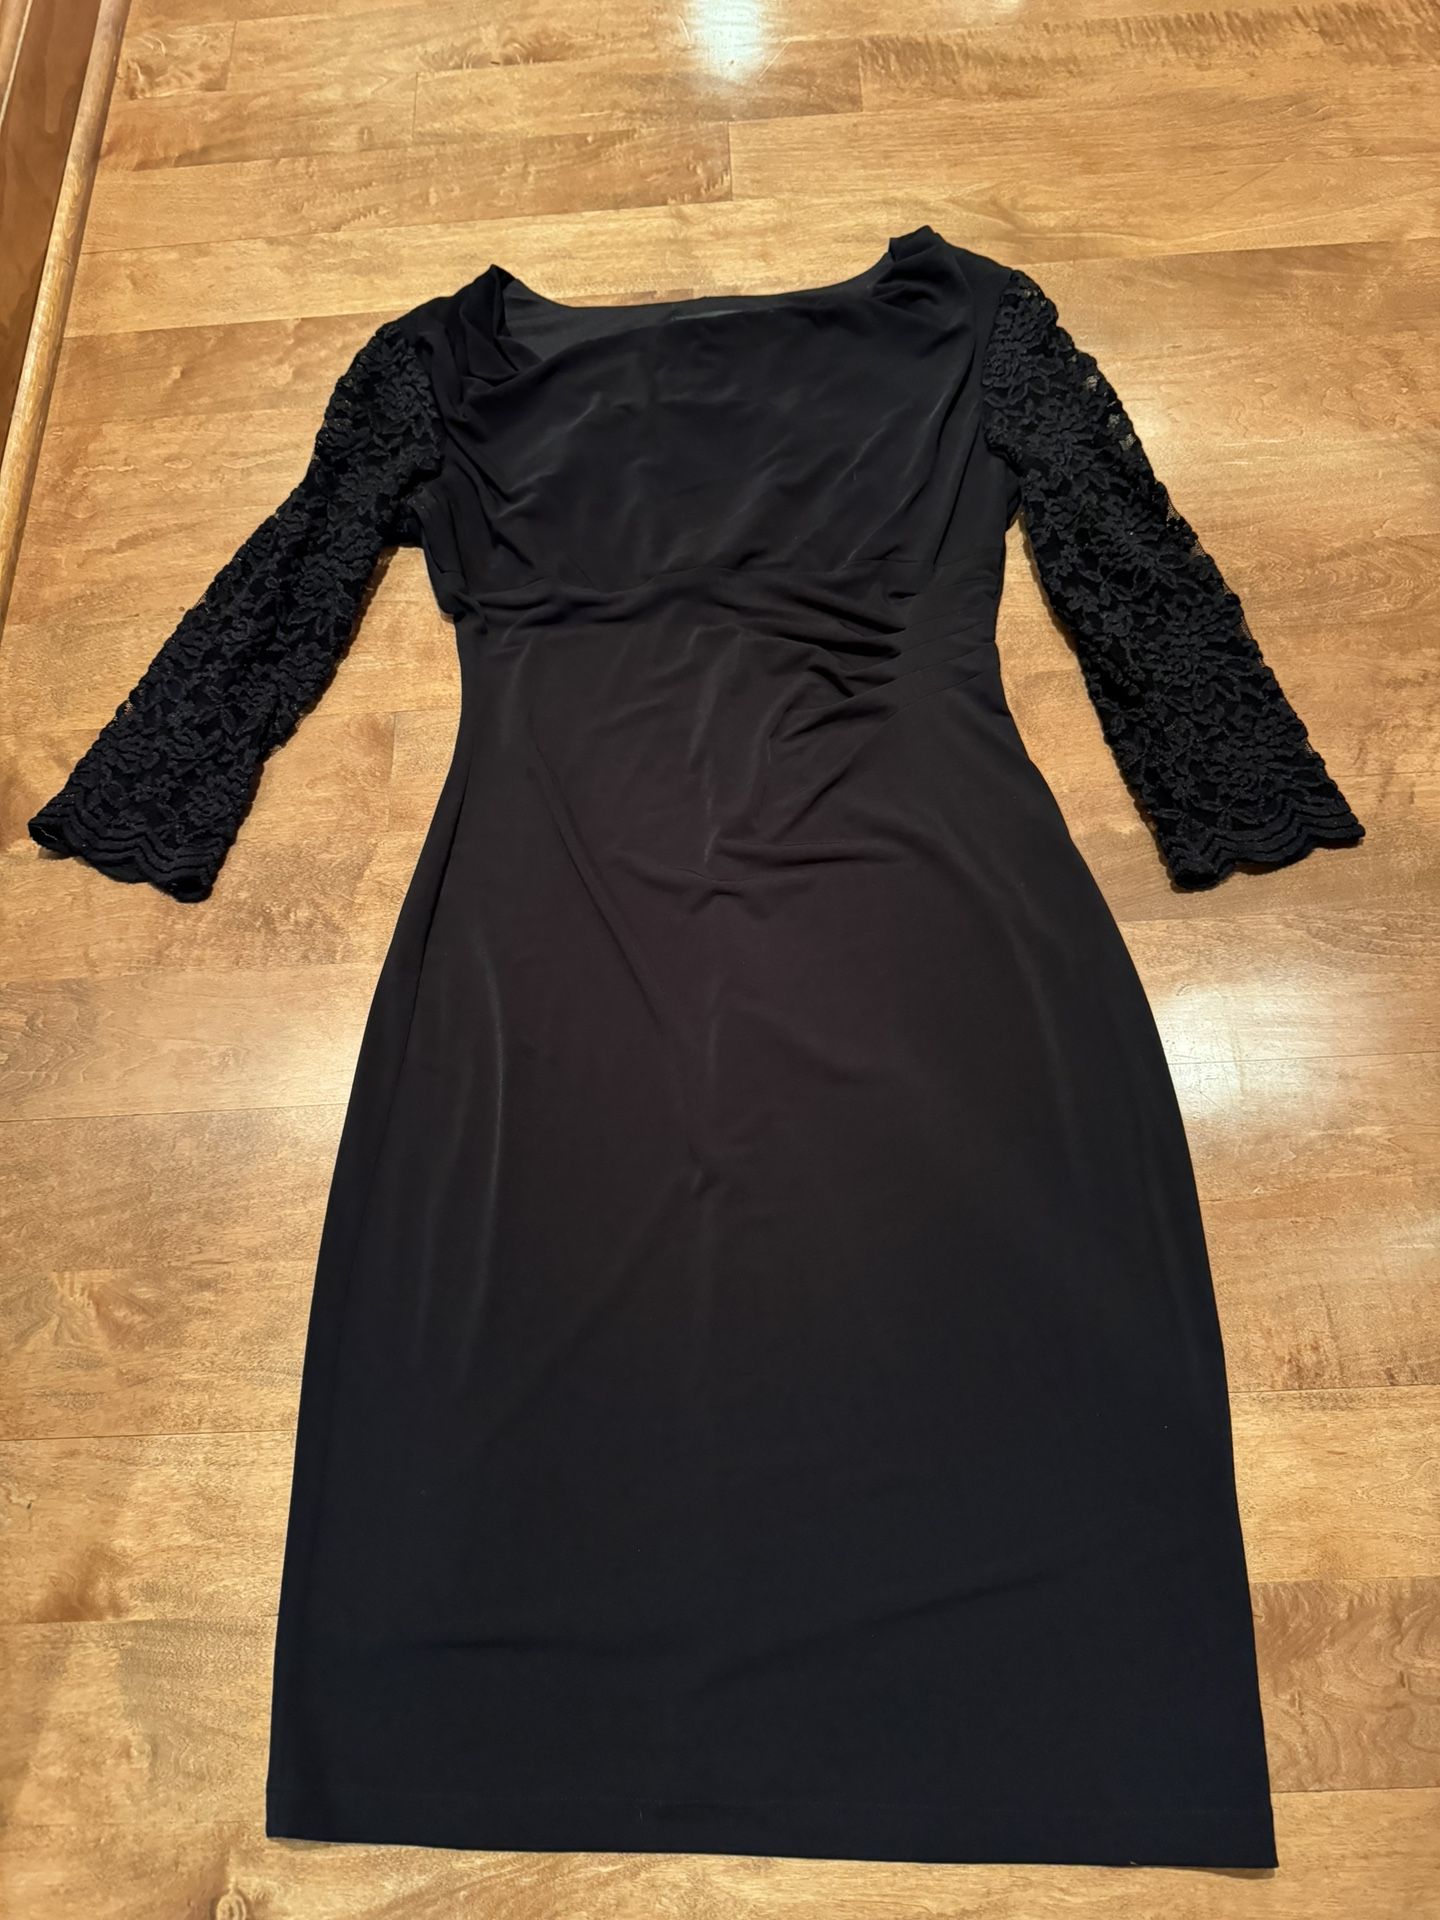 Woman’s Connected Apparel Sleeve Little Little Black Black Dress Shipping Available